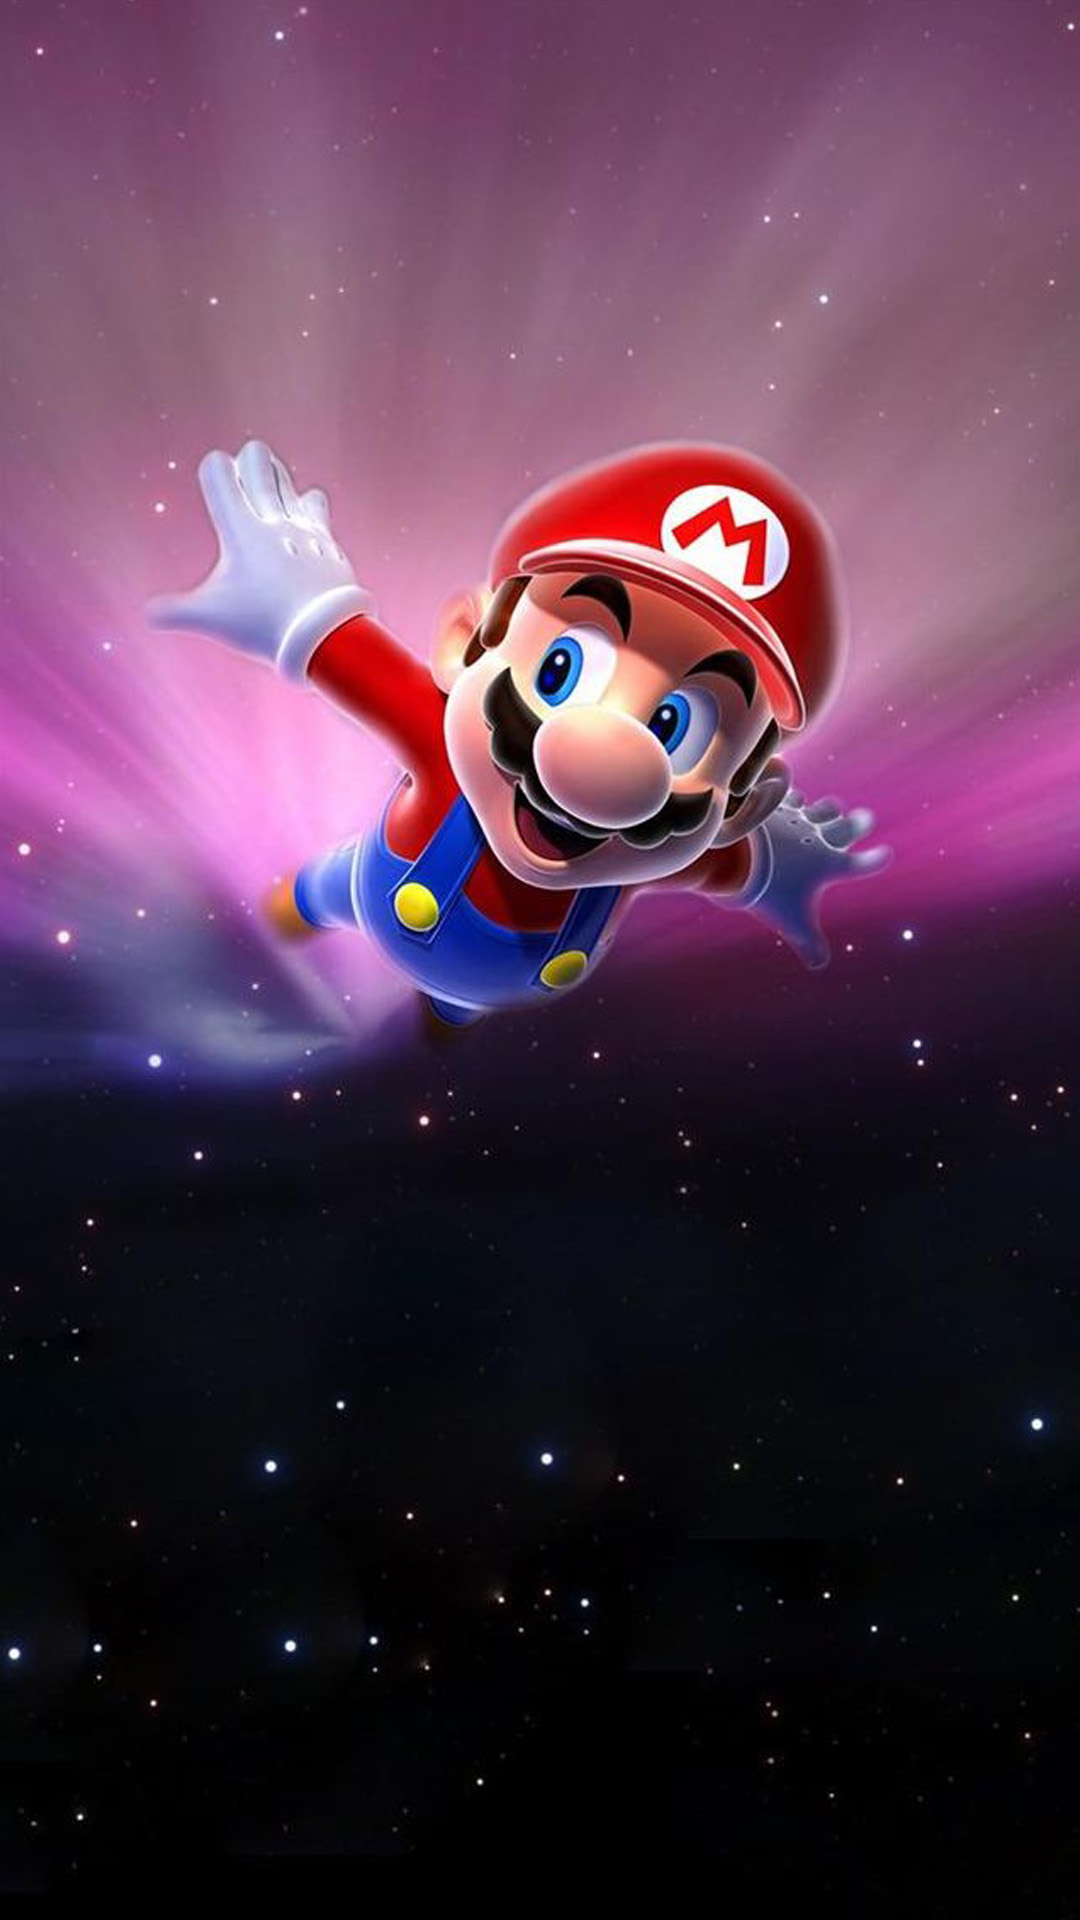 Mario flying in space Mac Android wallpaper